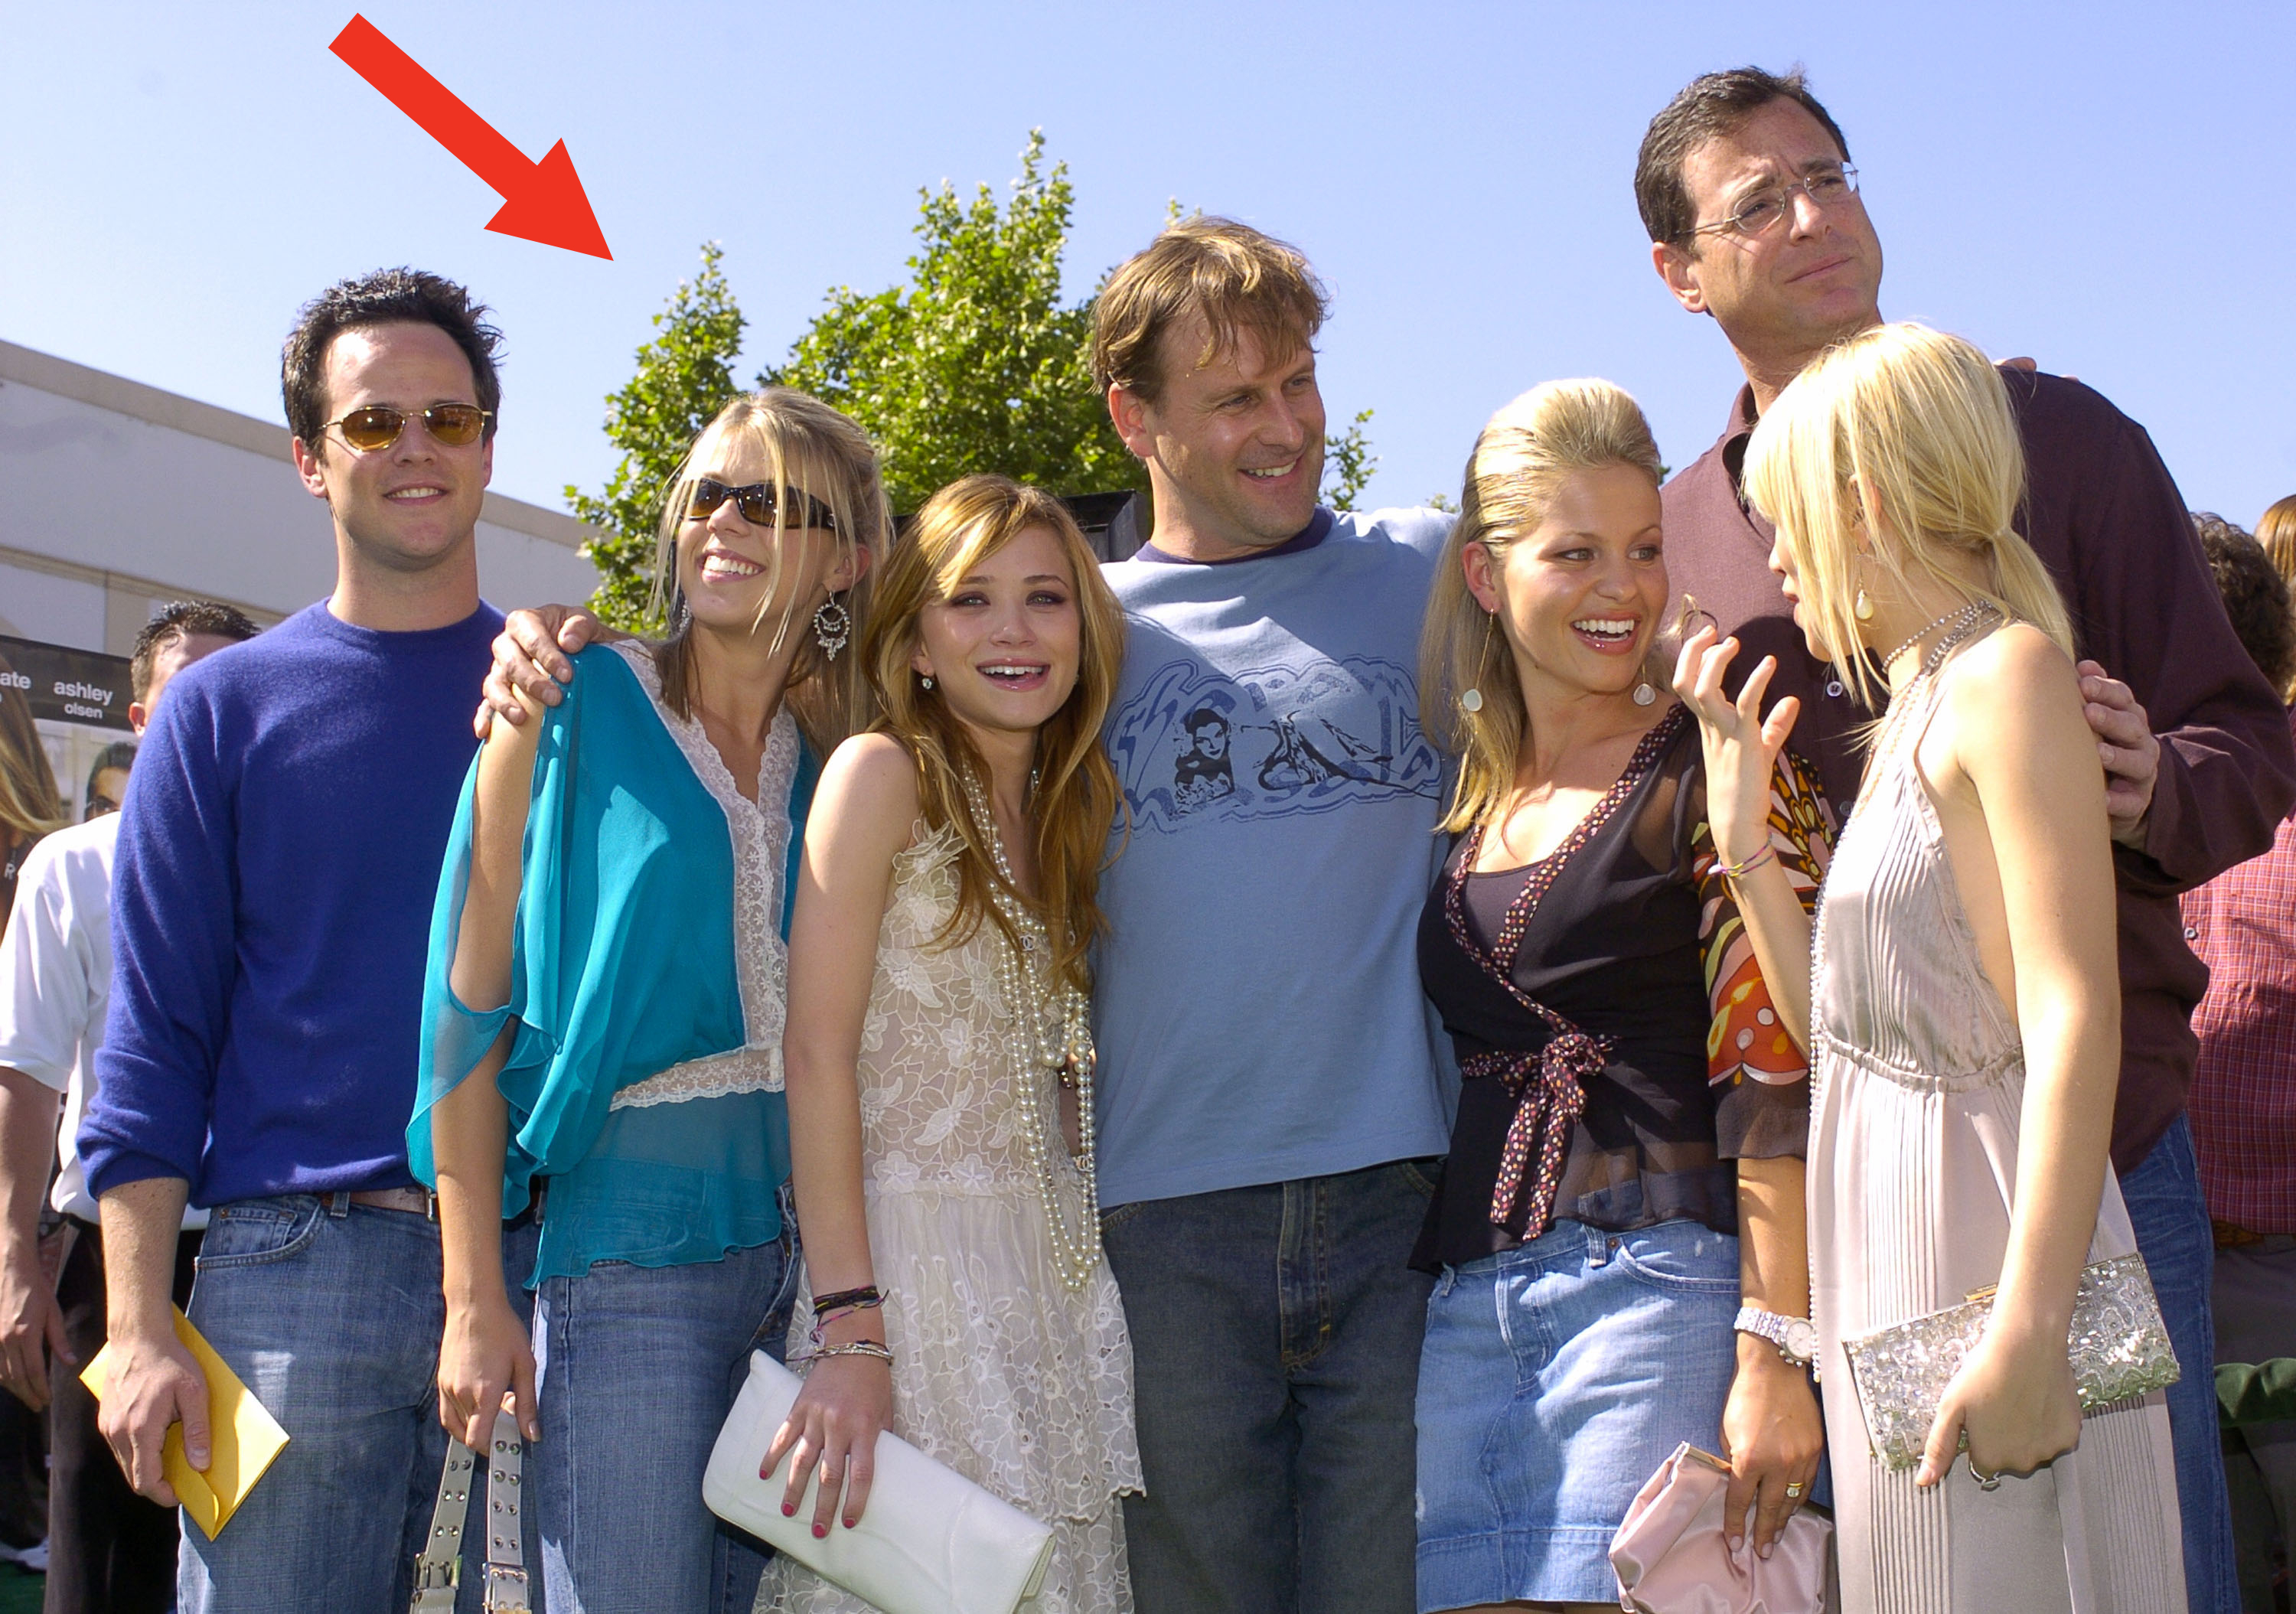 Cast of Full House posing together outdoors, including Dave Coulier, Jodie Sweetin, Mary-Kate Olsen, Ashley Olsen, Andrea Barber, Candace Cameron Bure, and Bob Saget